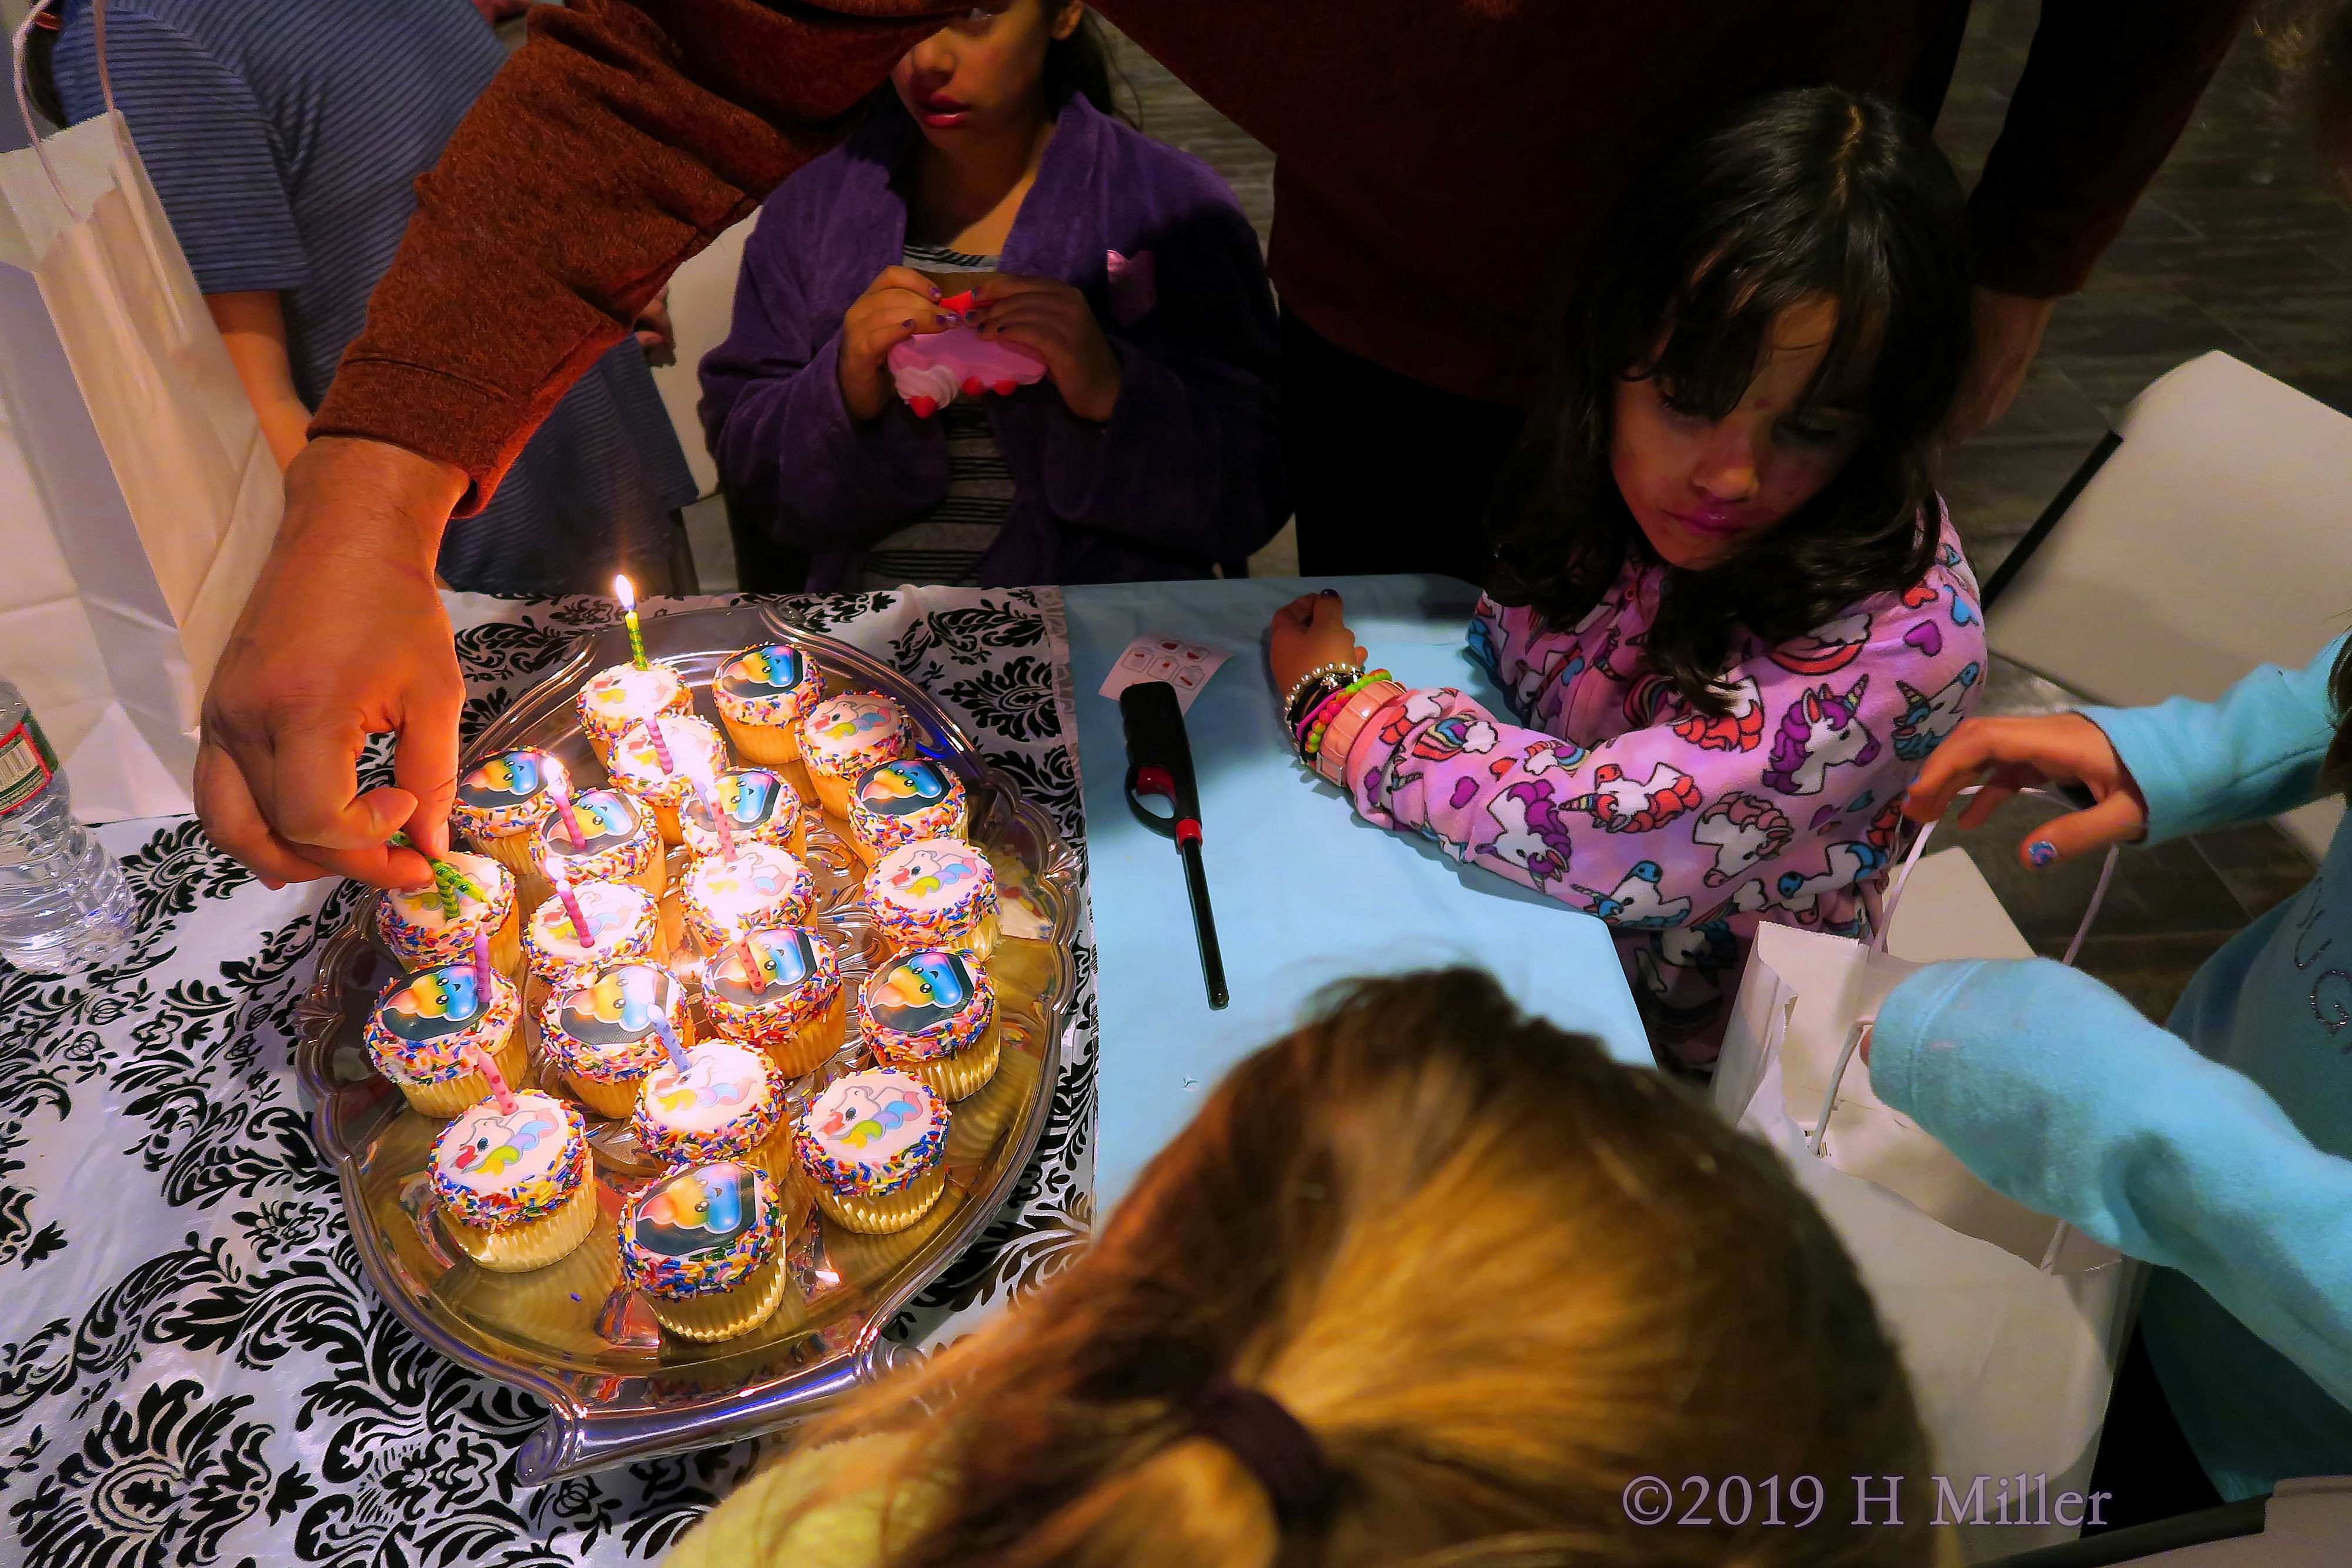 Making A Wish! Party Guests Gathering Around The Birthday Cupcake Table! 4